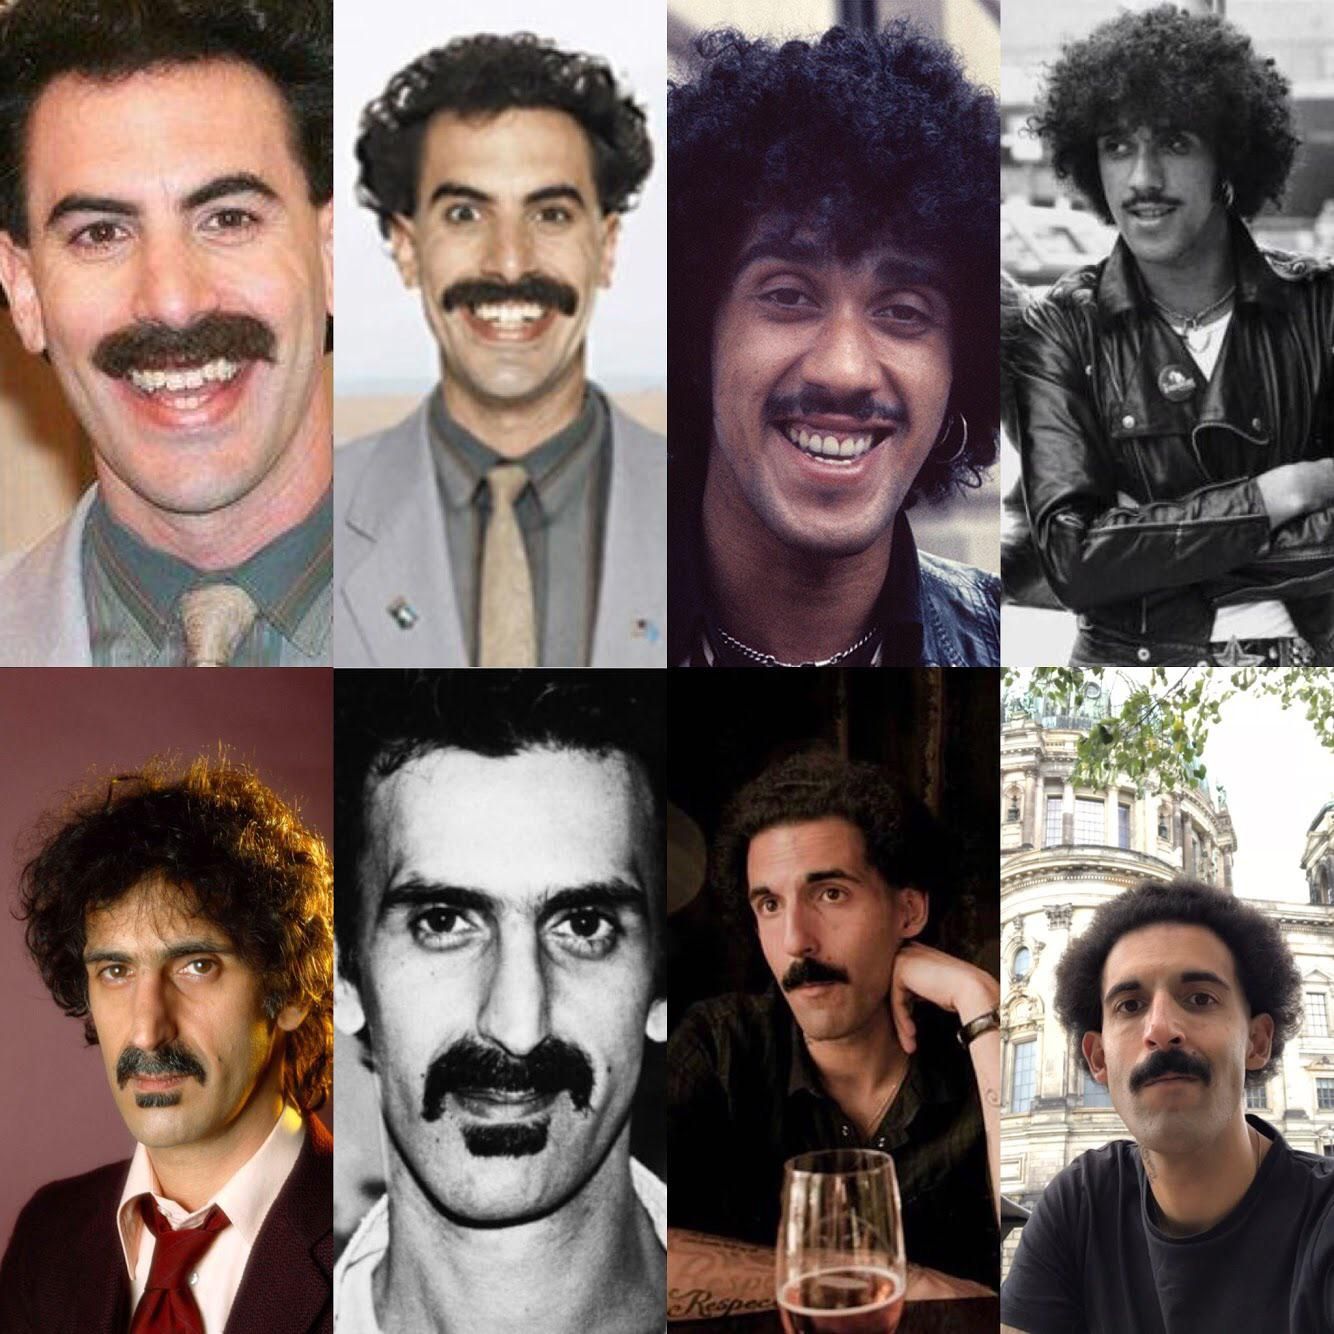 A friend told me I look like the illegitimate lovechild of Borat, Phil Lynott, and Frank Zappa. 15 minutes later, I got sent this.